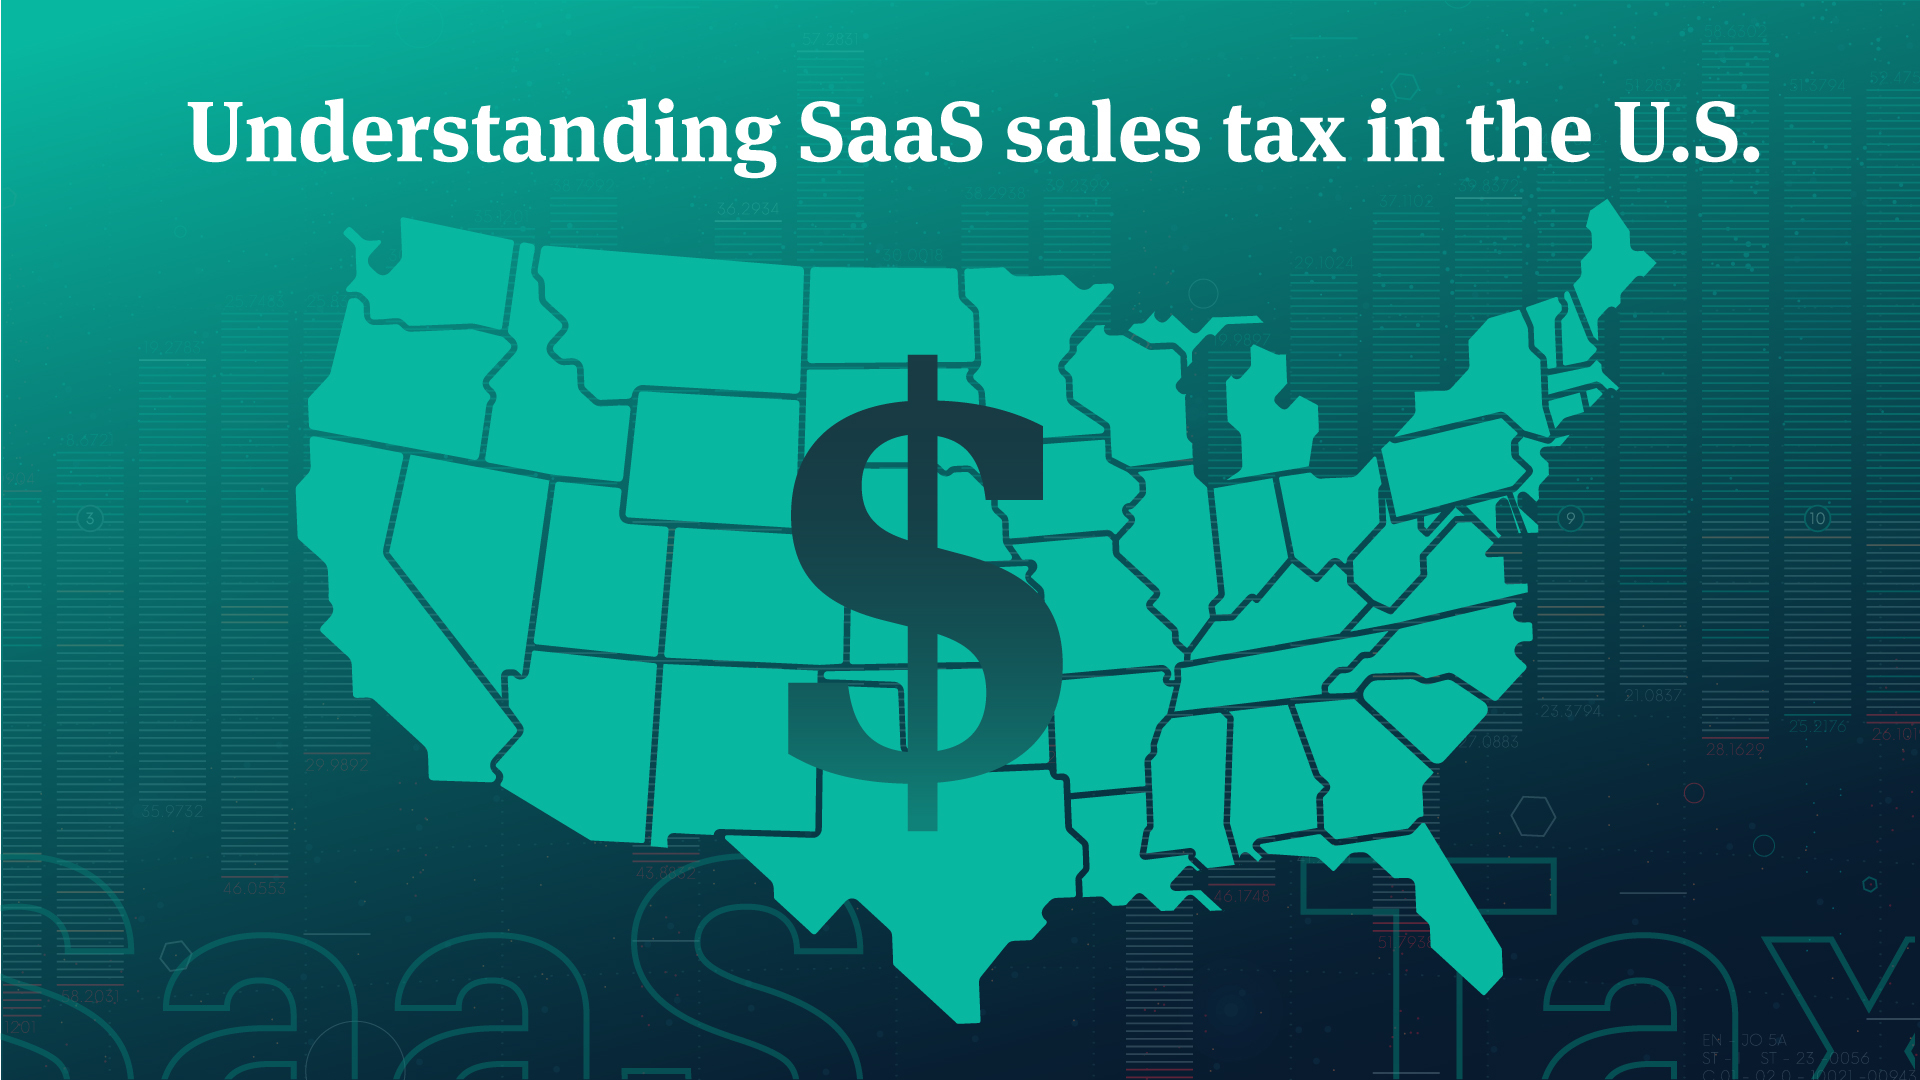 saas-sales-tax-and-what-you-need-to-know-2020-profitwell